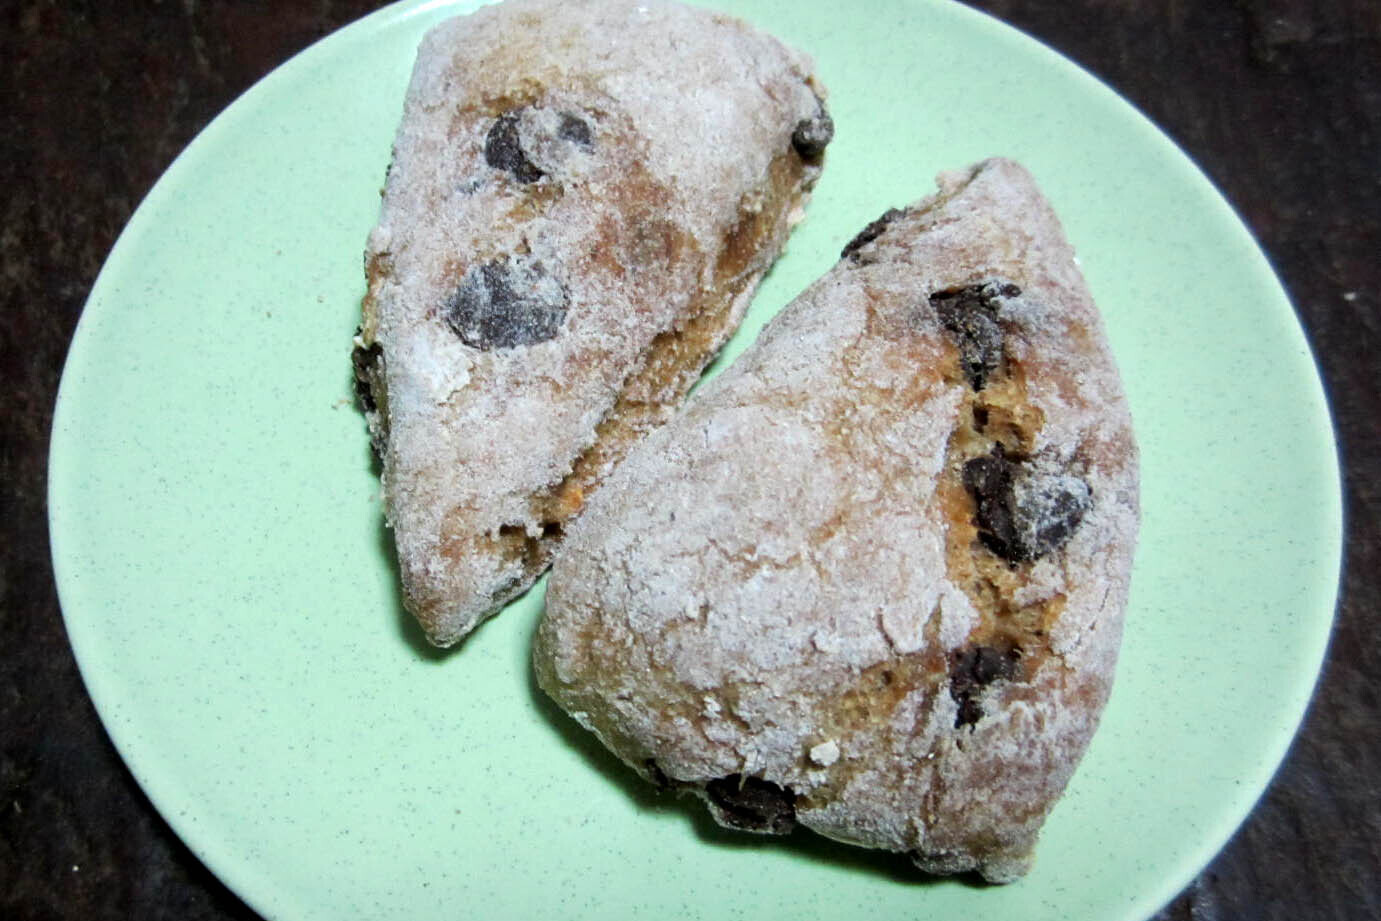 Two banana chocolate chip scones on a teal plate